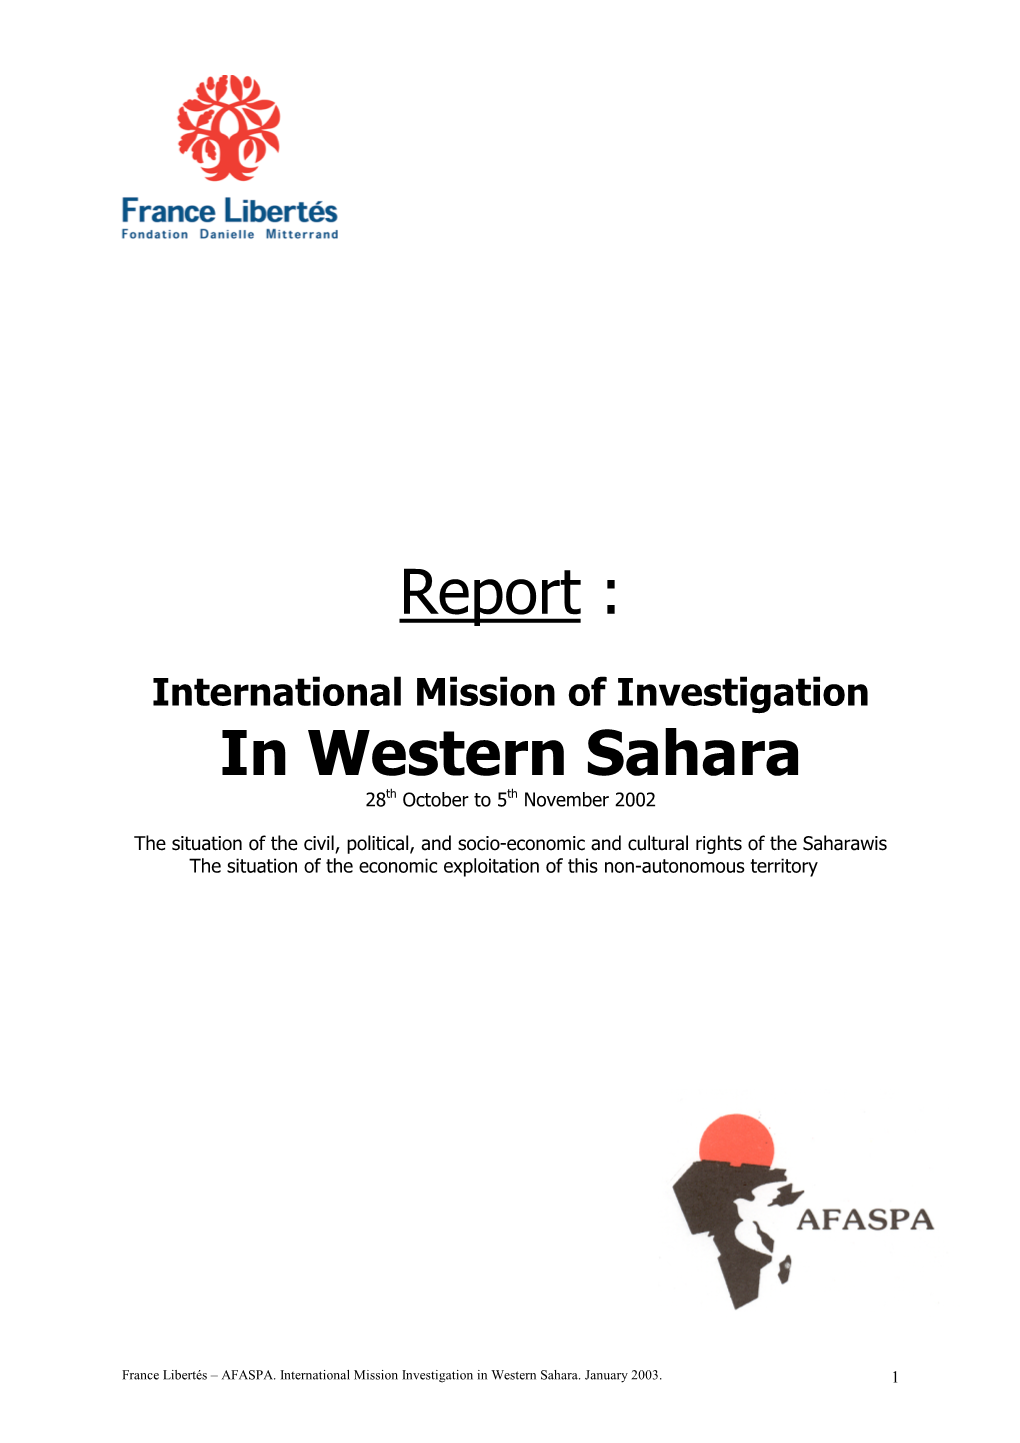 International Mission of Investigation in Western Sahara 28Th October to 5Th November 2002